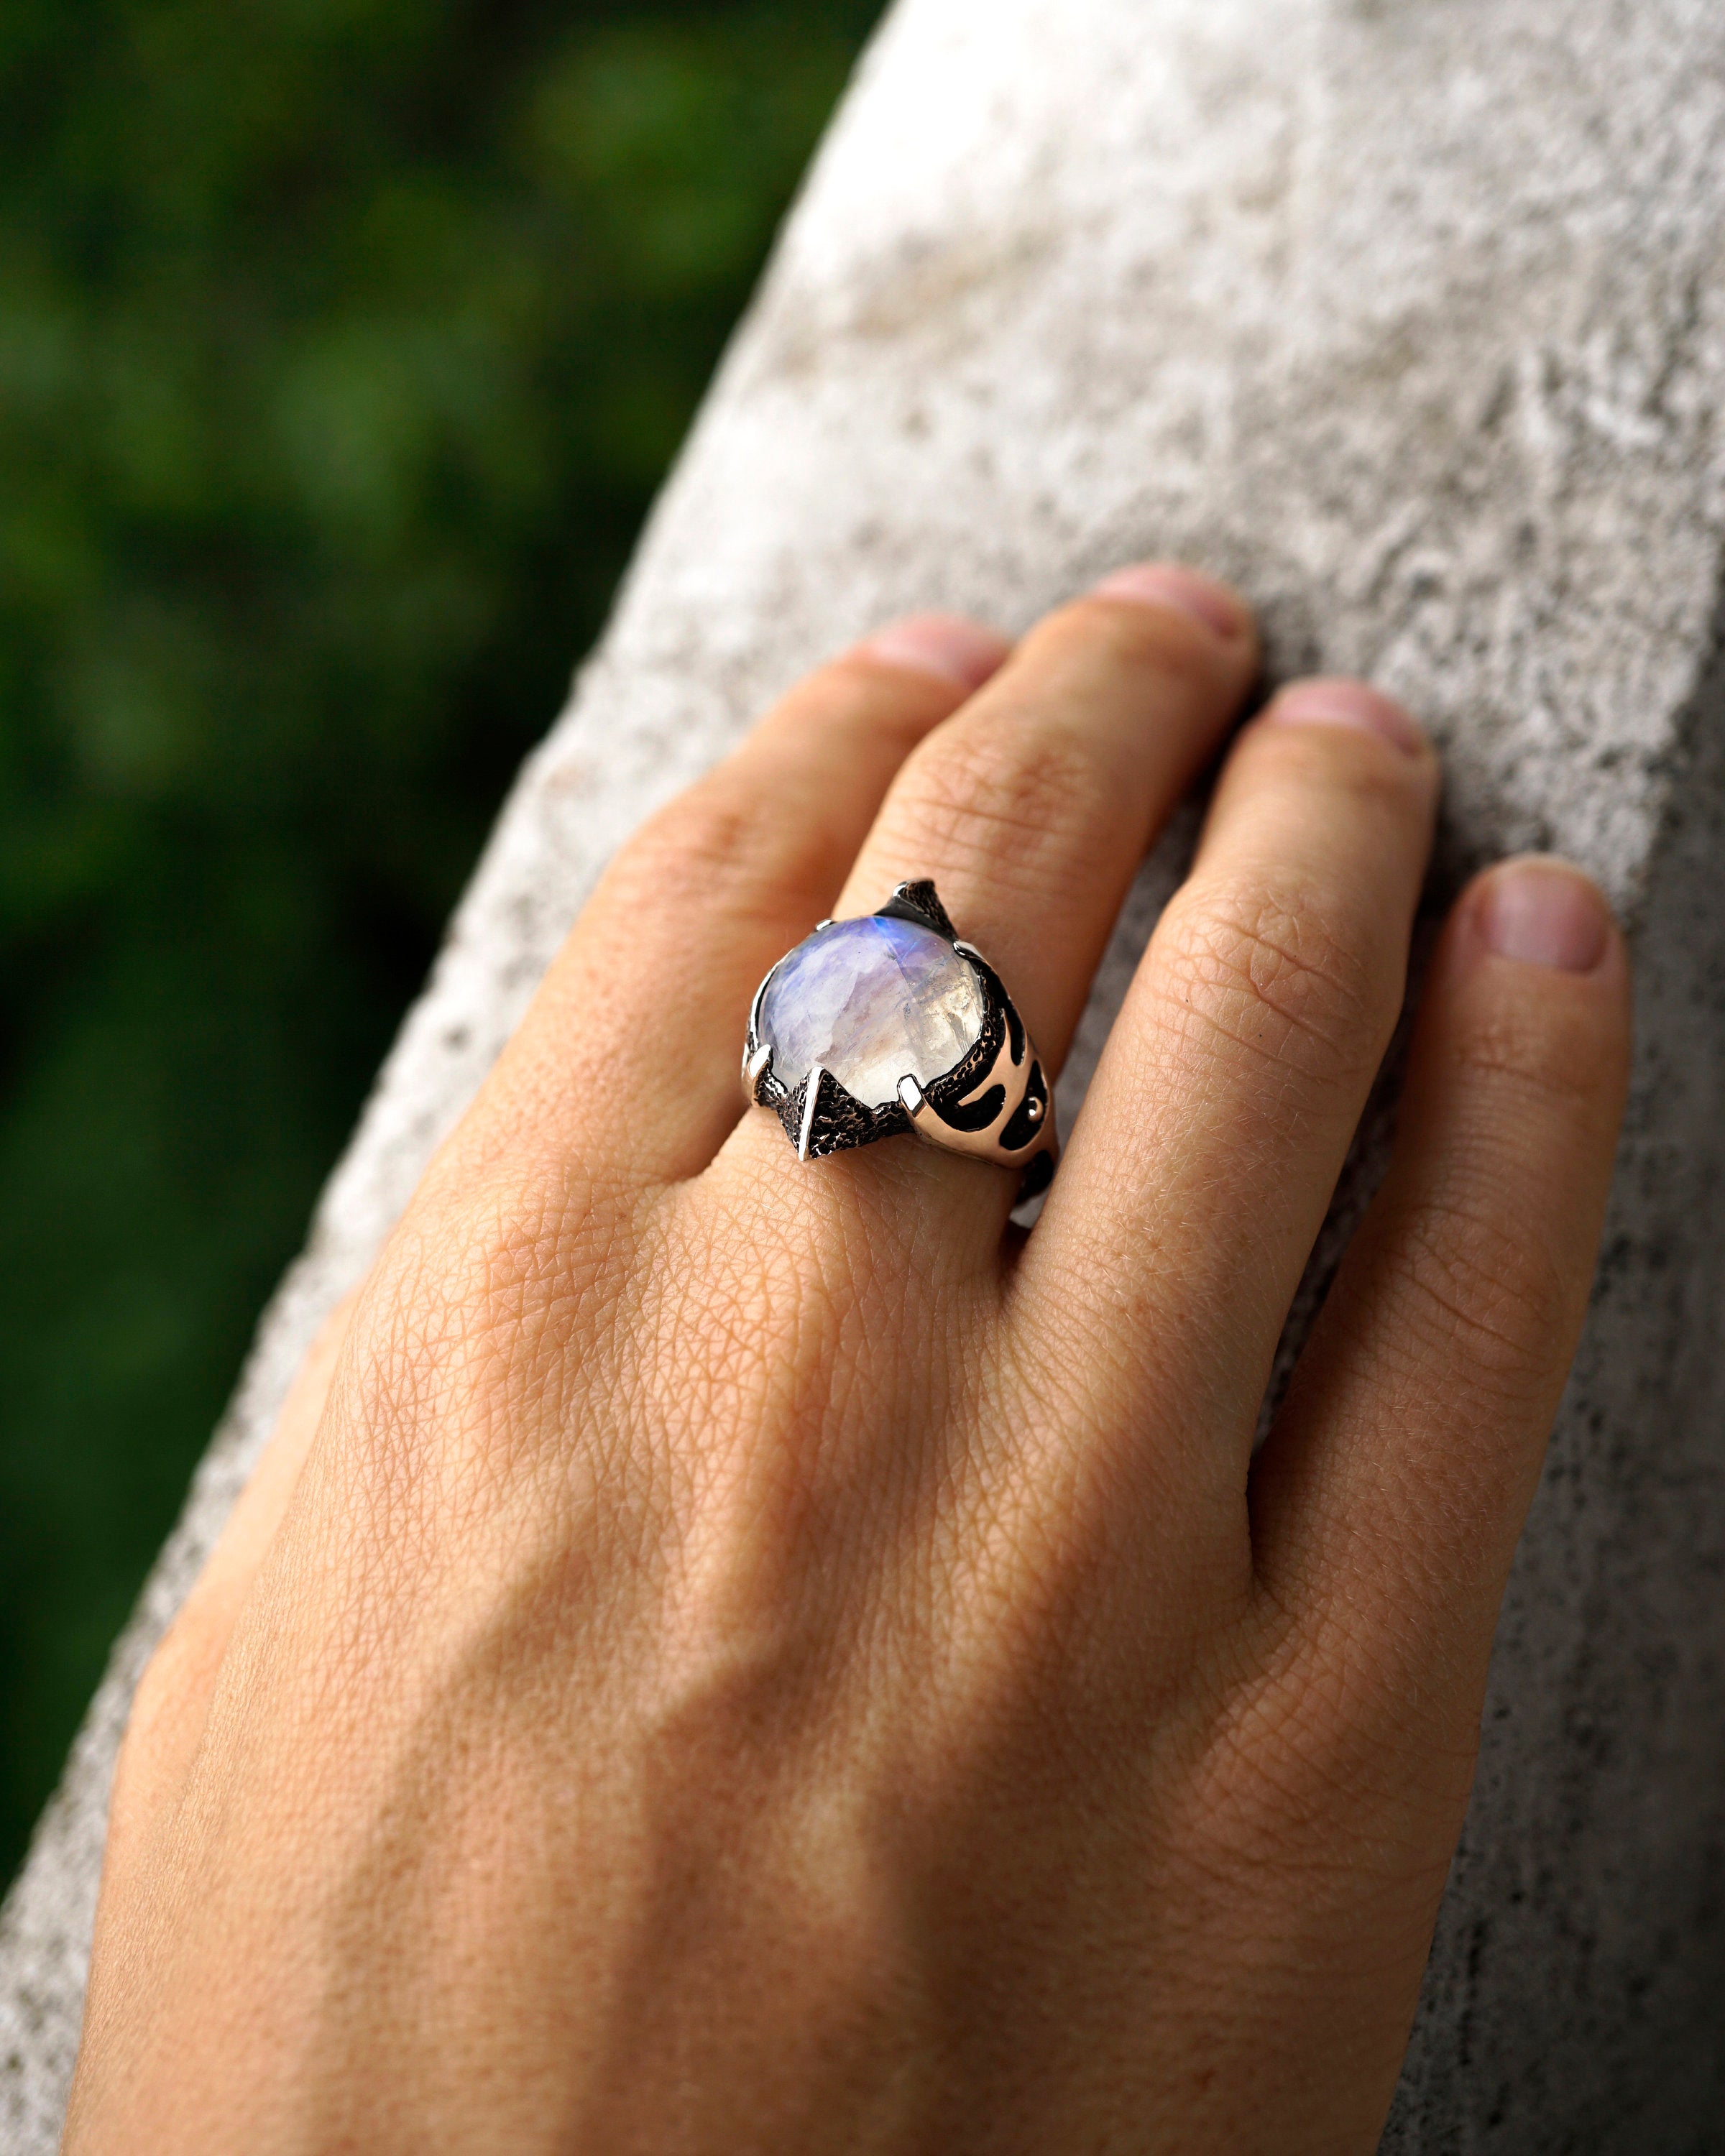 Large Moonstone ring, Moonstone signet rings, June birthstone ring, Unique ring, Statement ring, Sterling silver moonstone ring, 